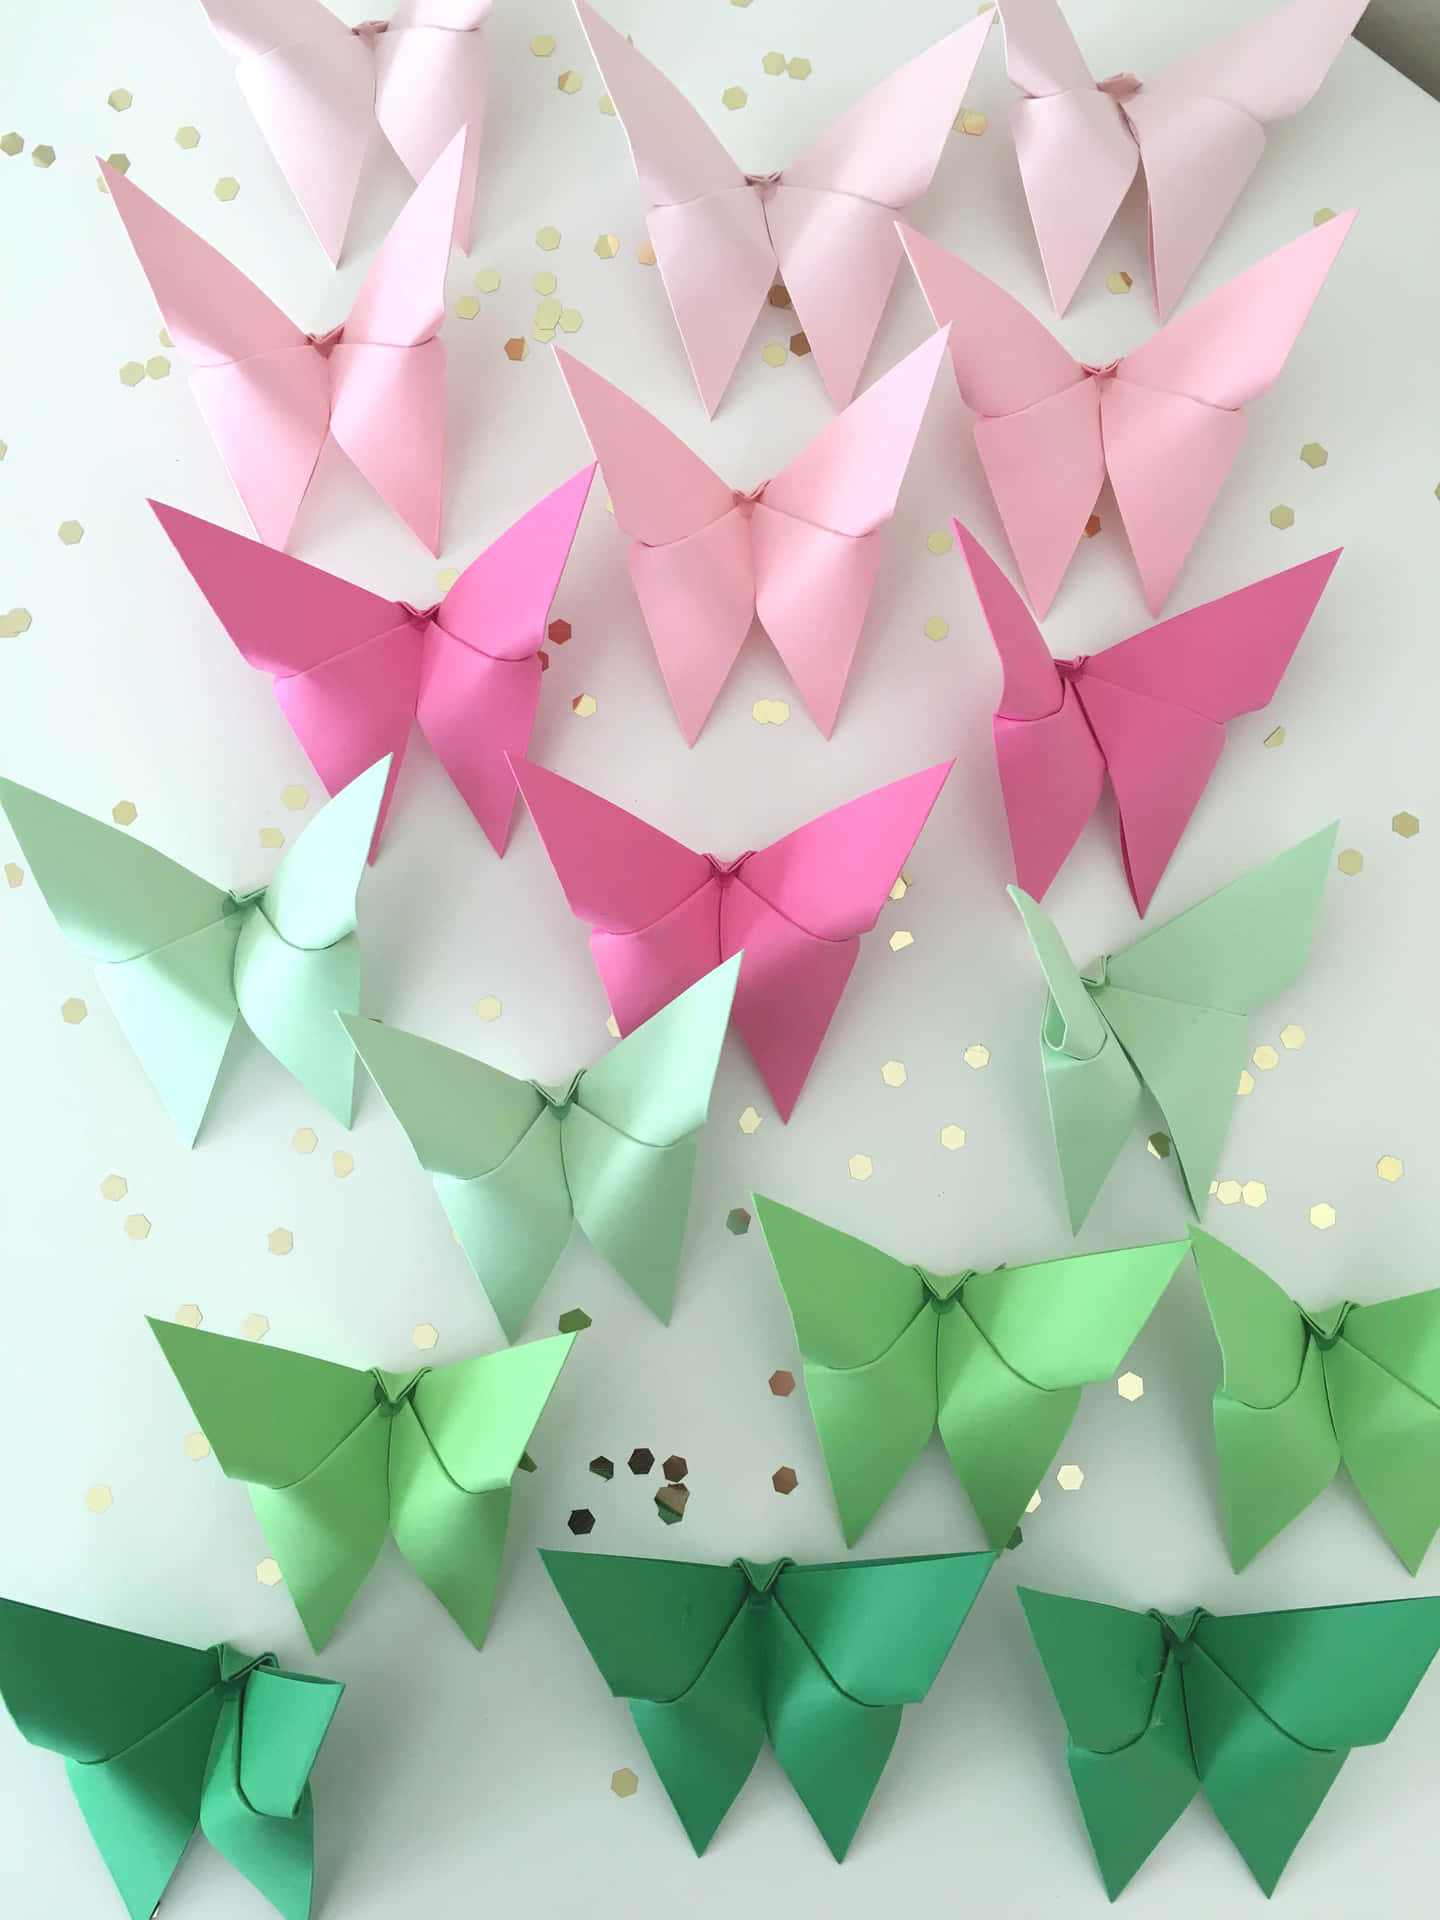 Beautiful Origami Butterfly Flying Gracefully in the Sky" Wallpaper